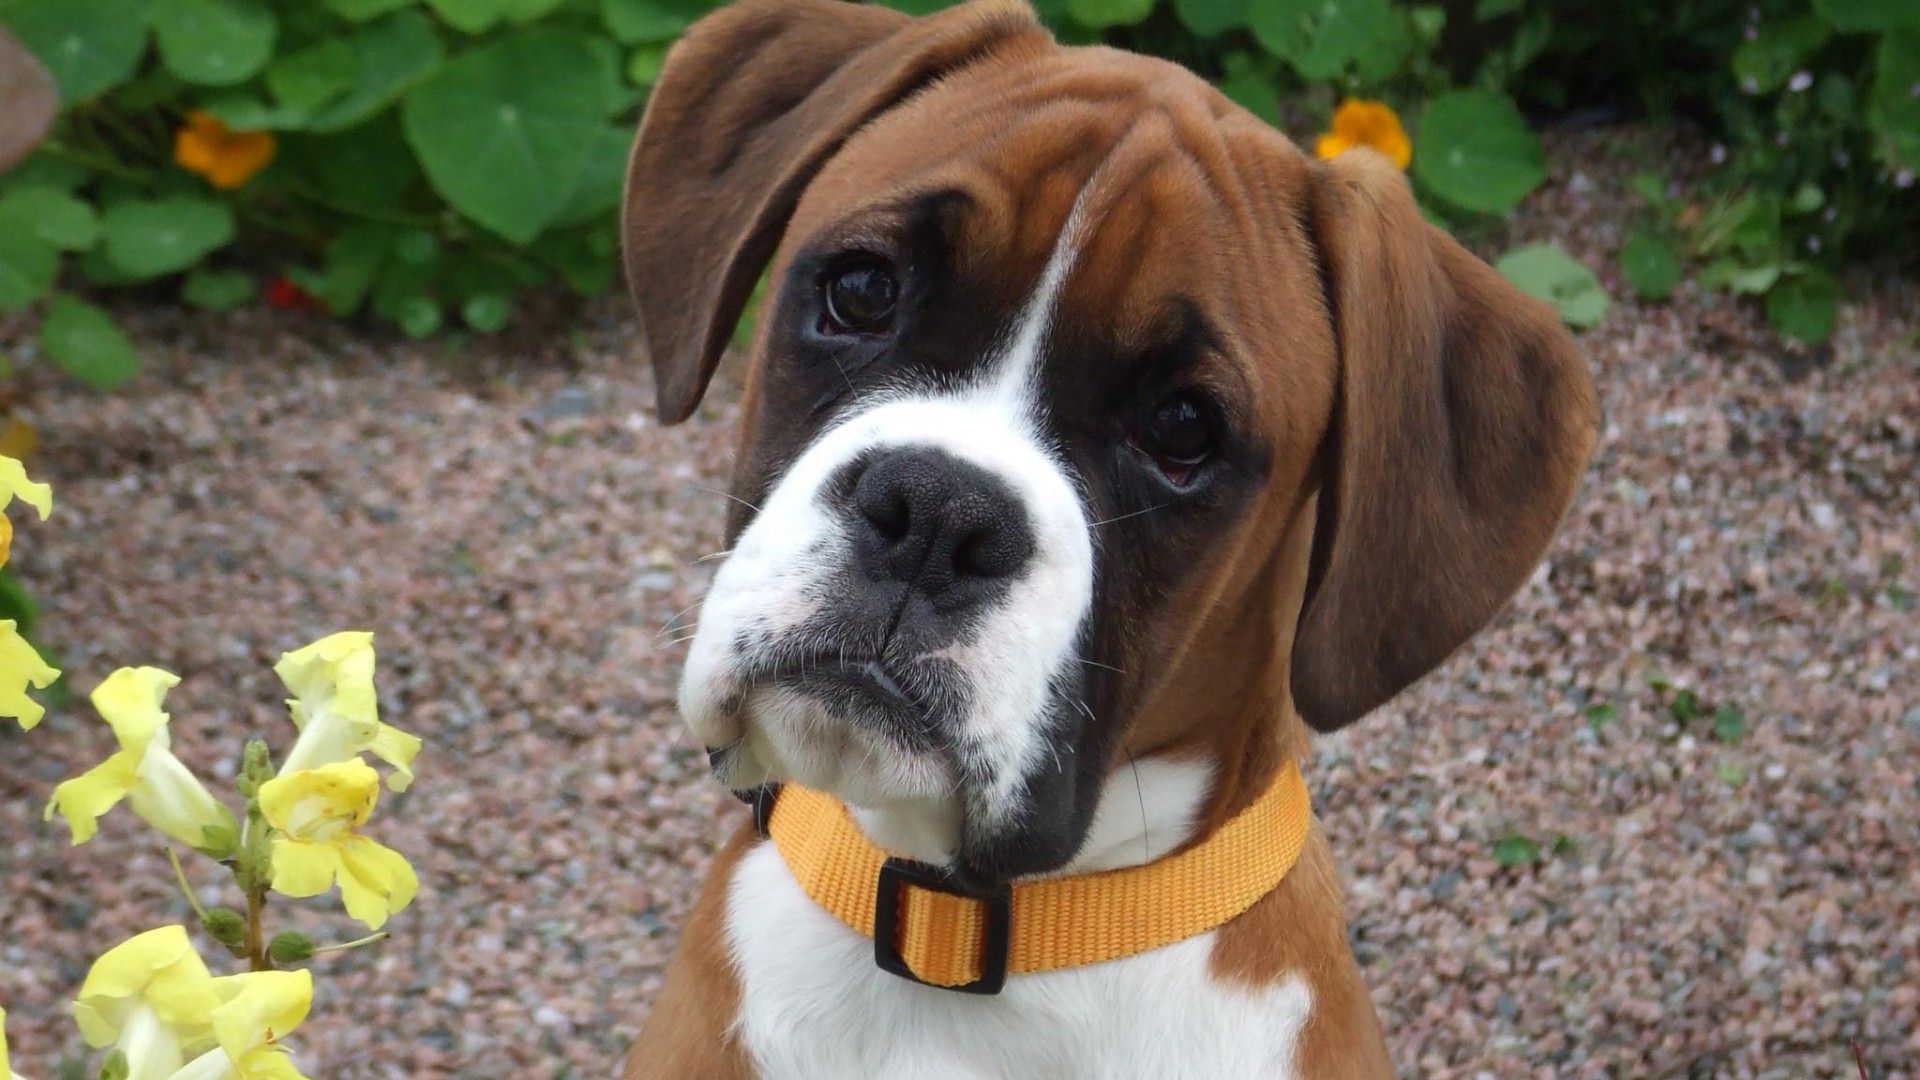 Boxer Dog HD Wallpaper Image Pictures